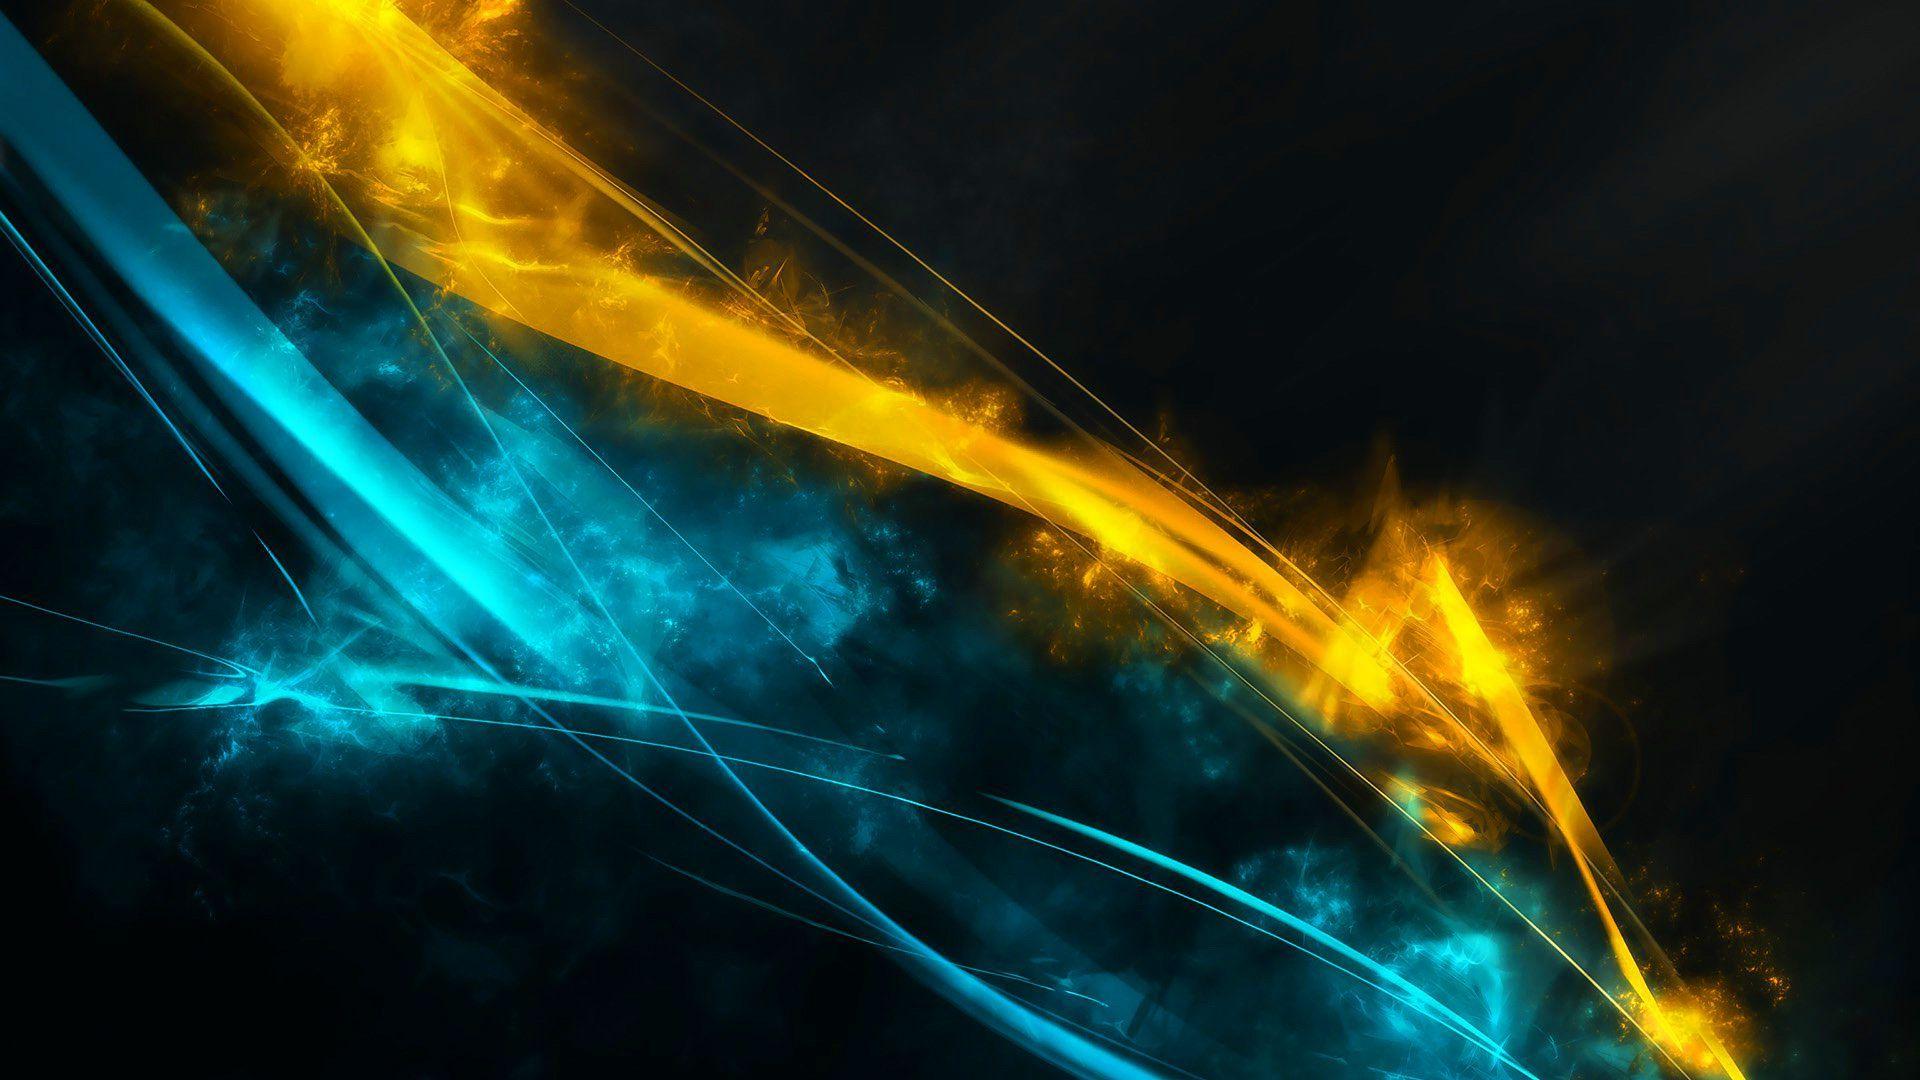 Blue and Yellow Wallpapers - Top Free Blue and Yellow Backgrounds